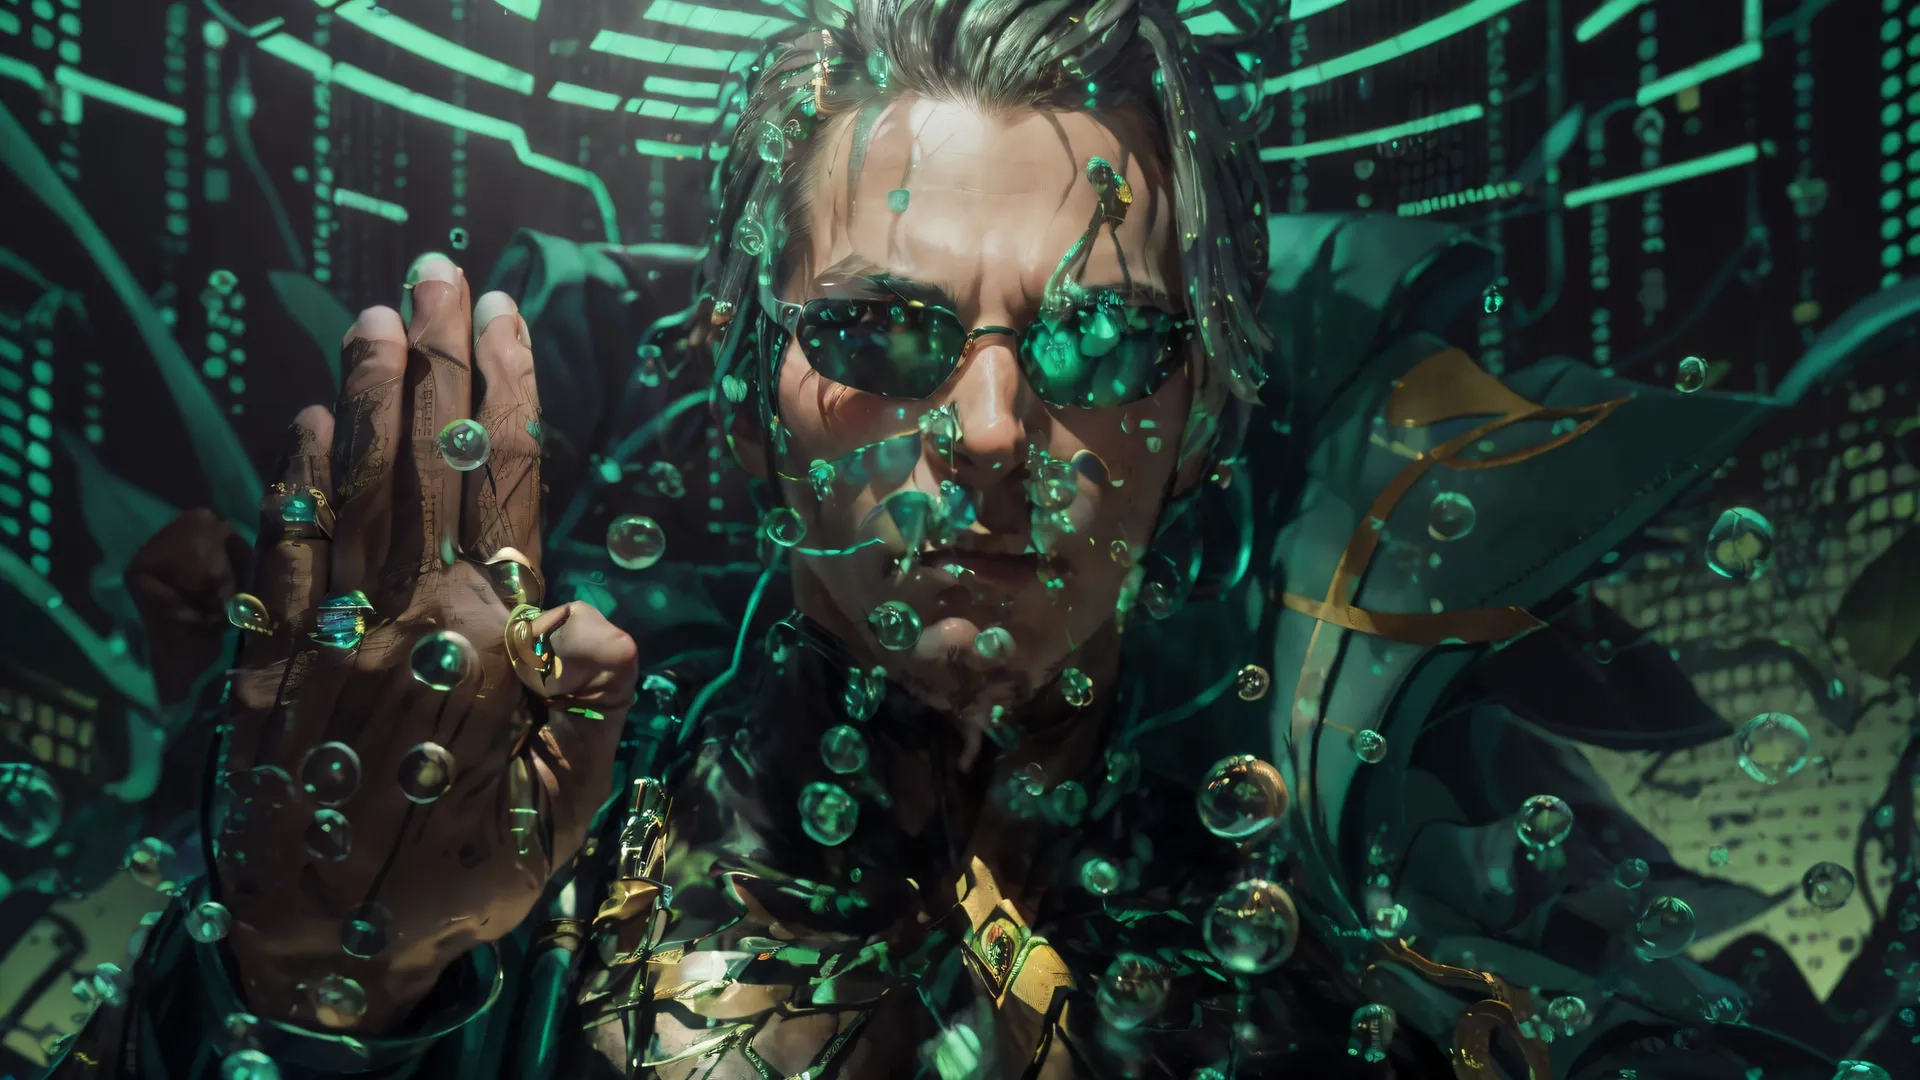 a man with some spiky green wire in his hands with the eyes covered in water bubbles and eyes open to see something like liquid
